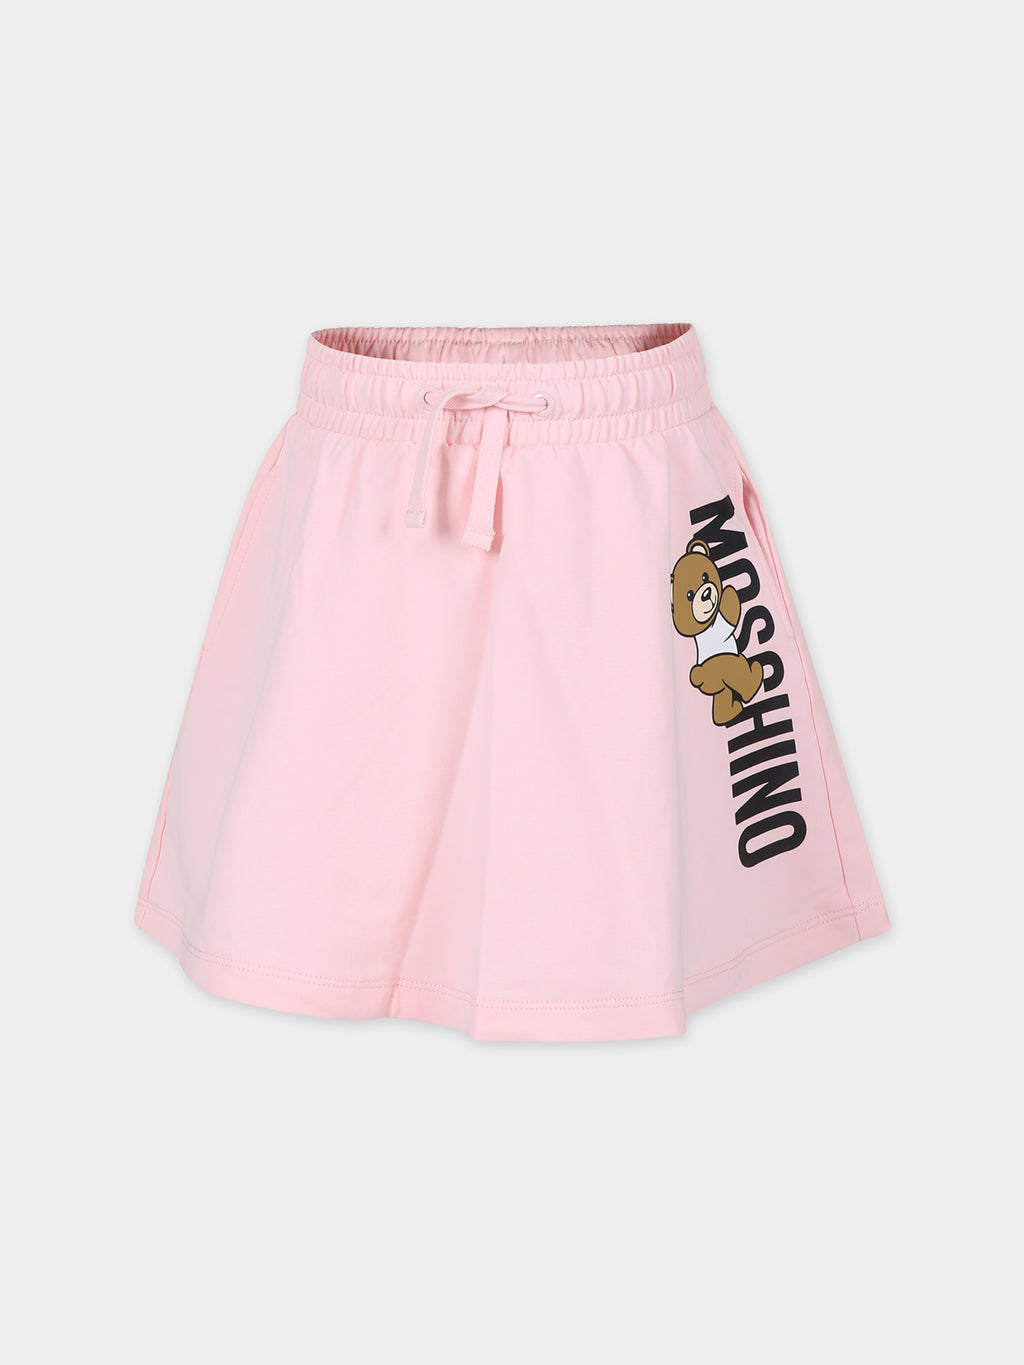 Pink skirt for girl with Teddy bear and logo